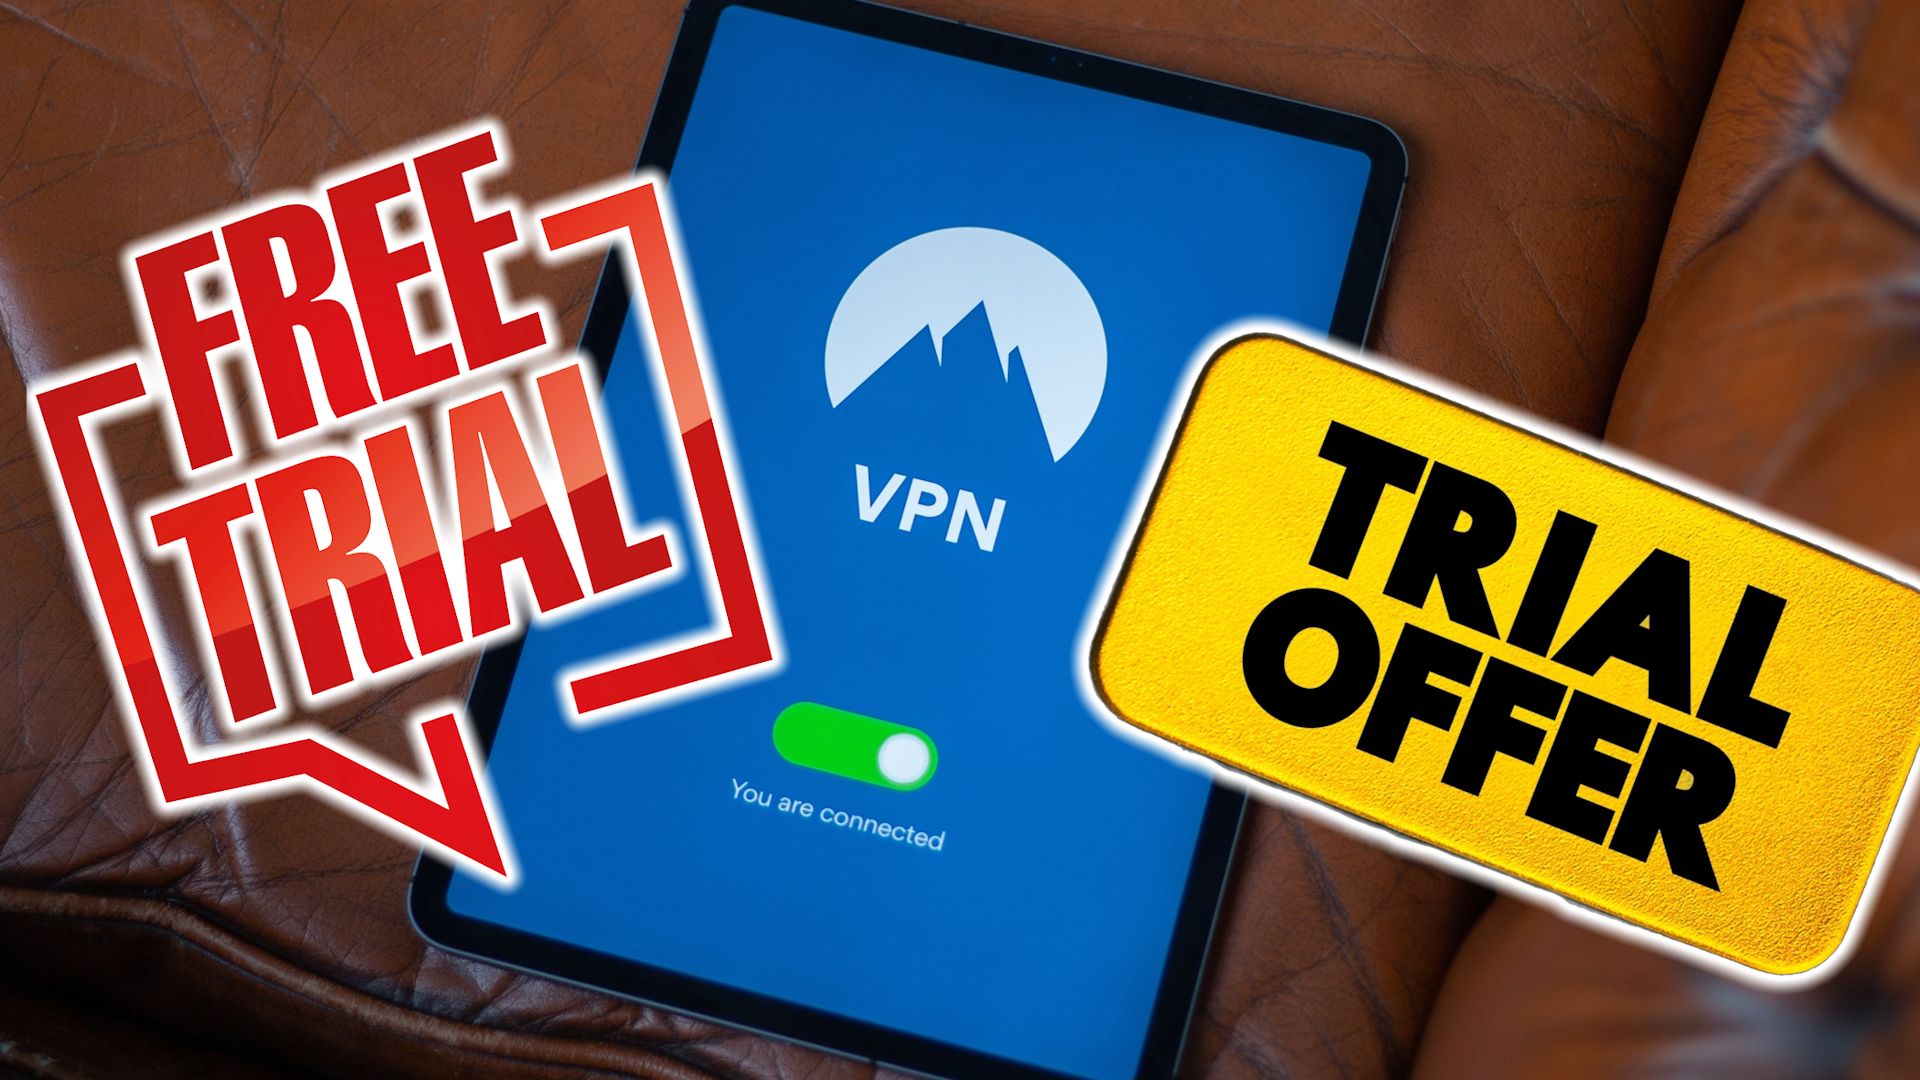 vpn service with free trial offer signs edit